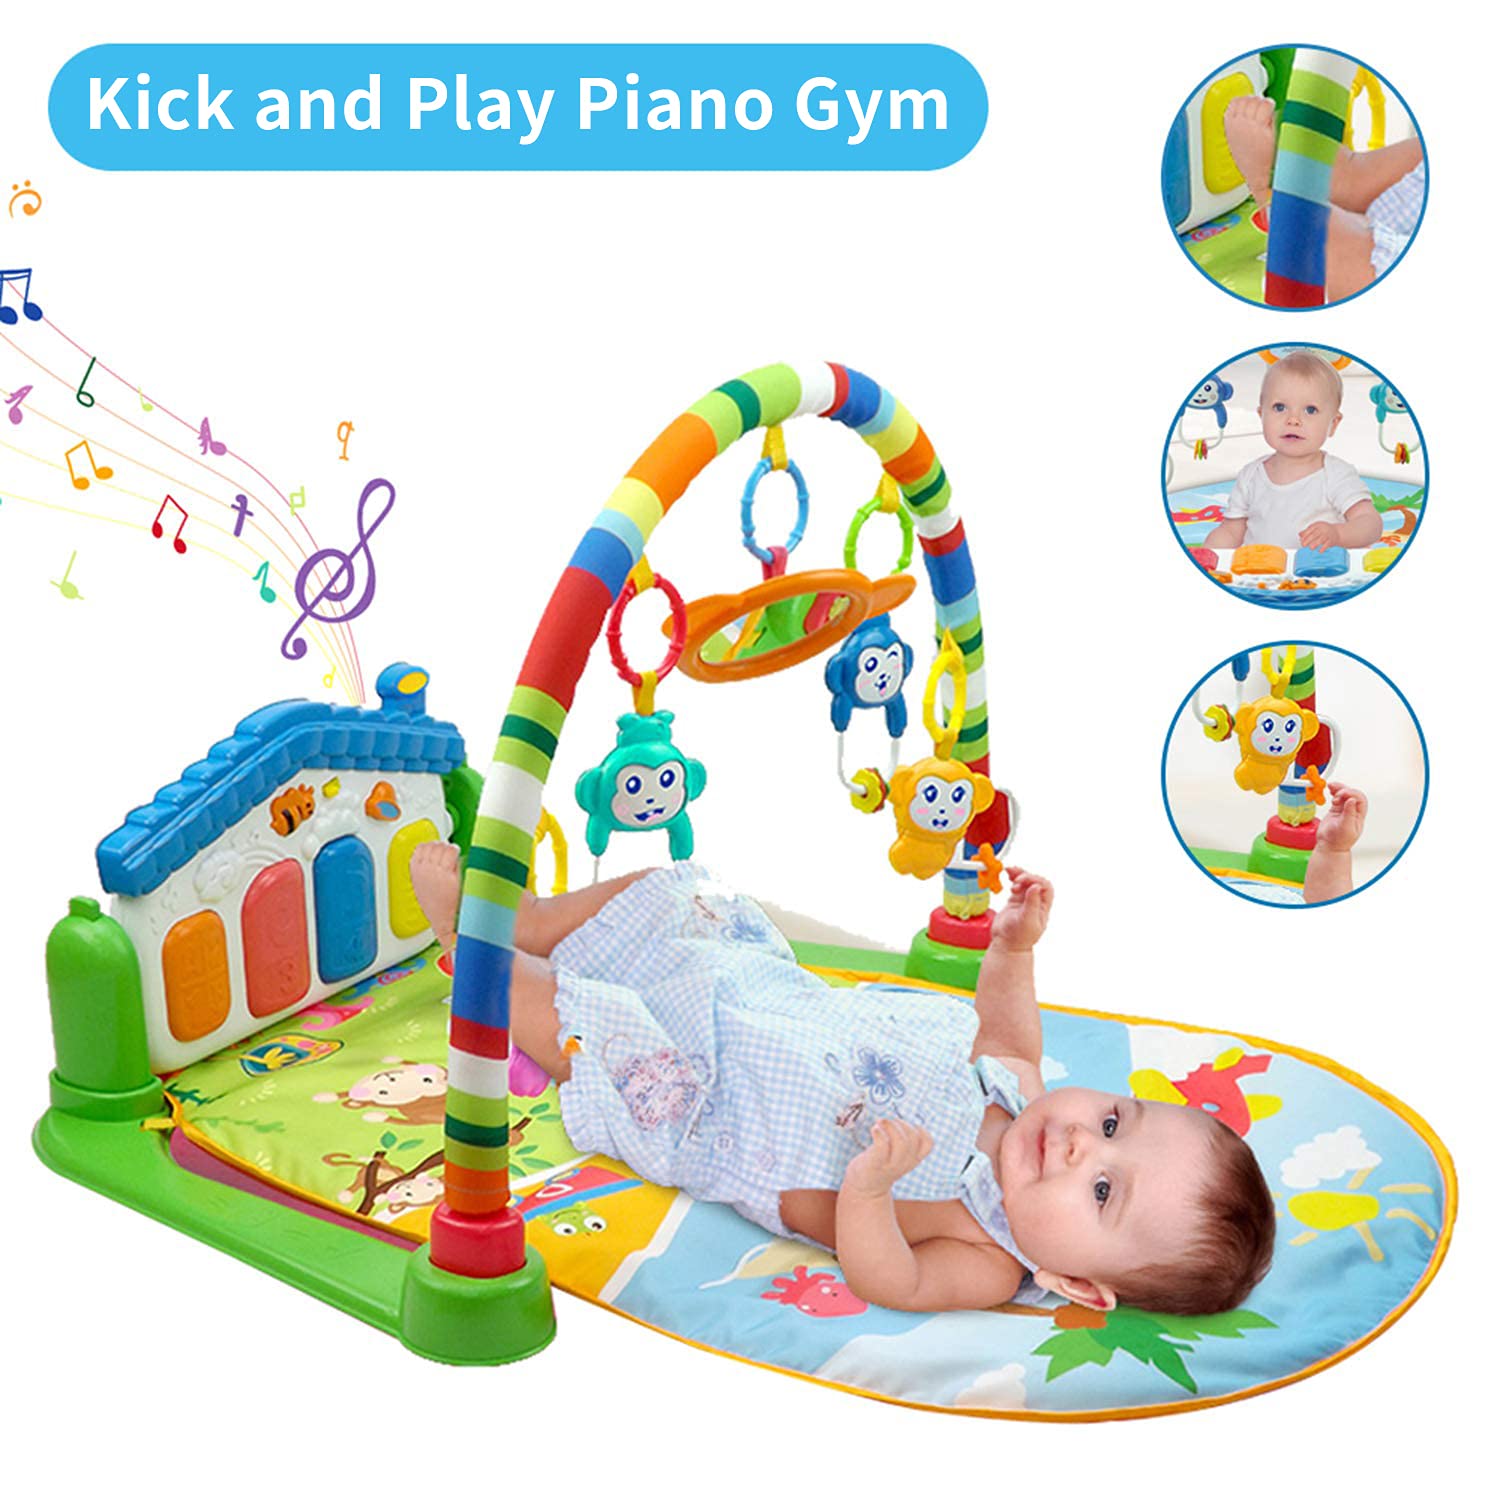 WYSWYG Baby Play Mat Baby Play Gym Activity Mat Kick and Play Piano Gym Activity Center for Baby with Music and Light 0 3 6 12 Months